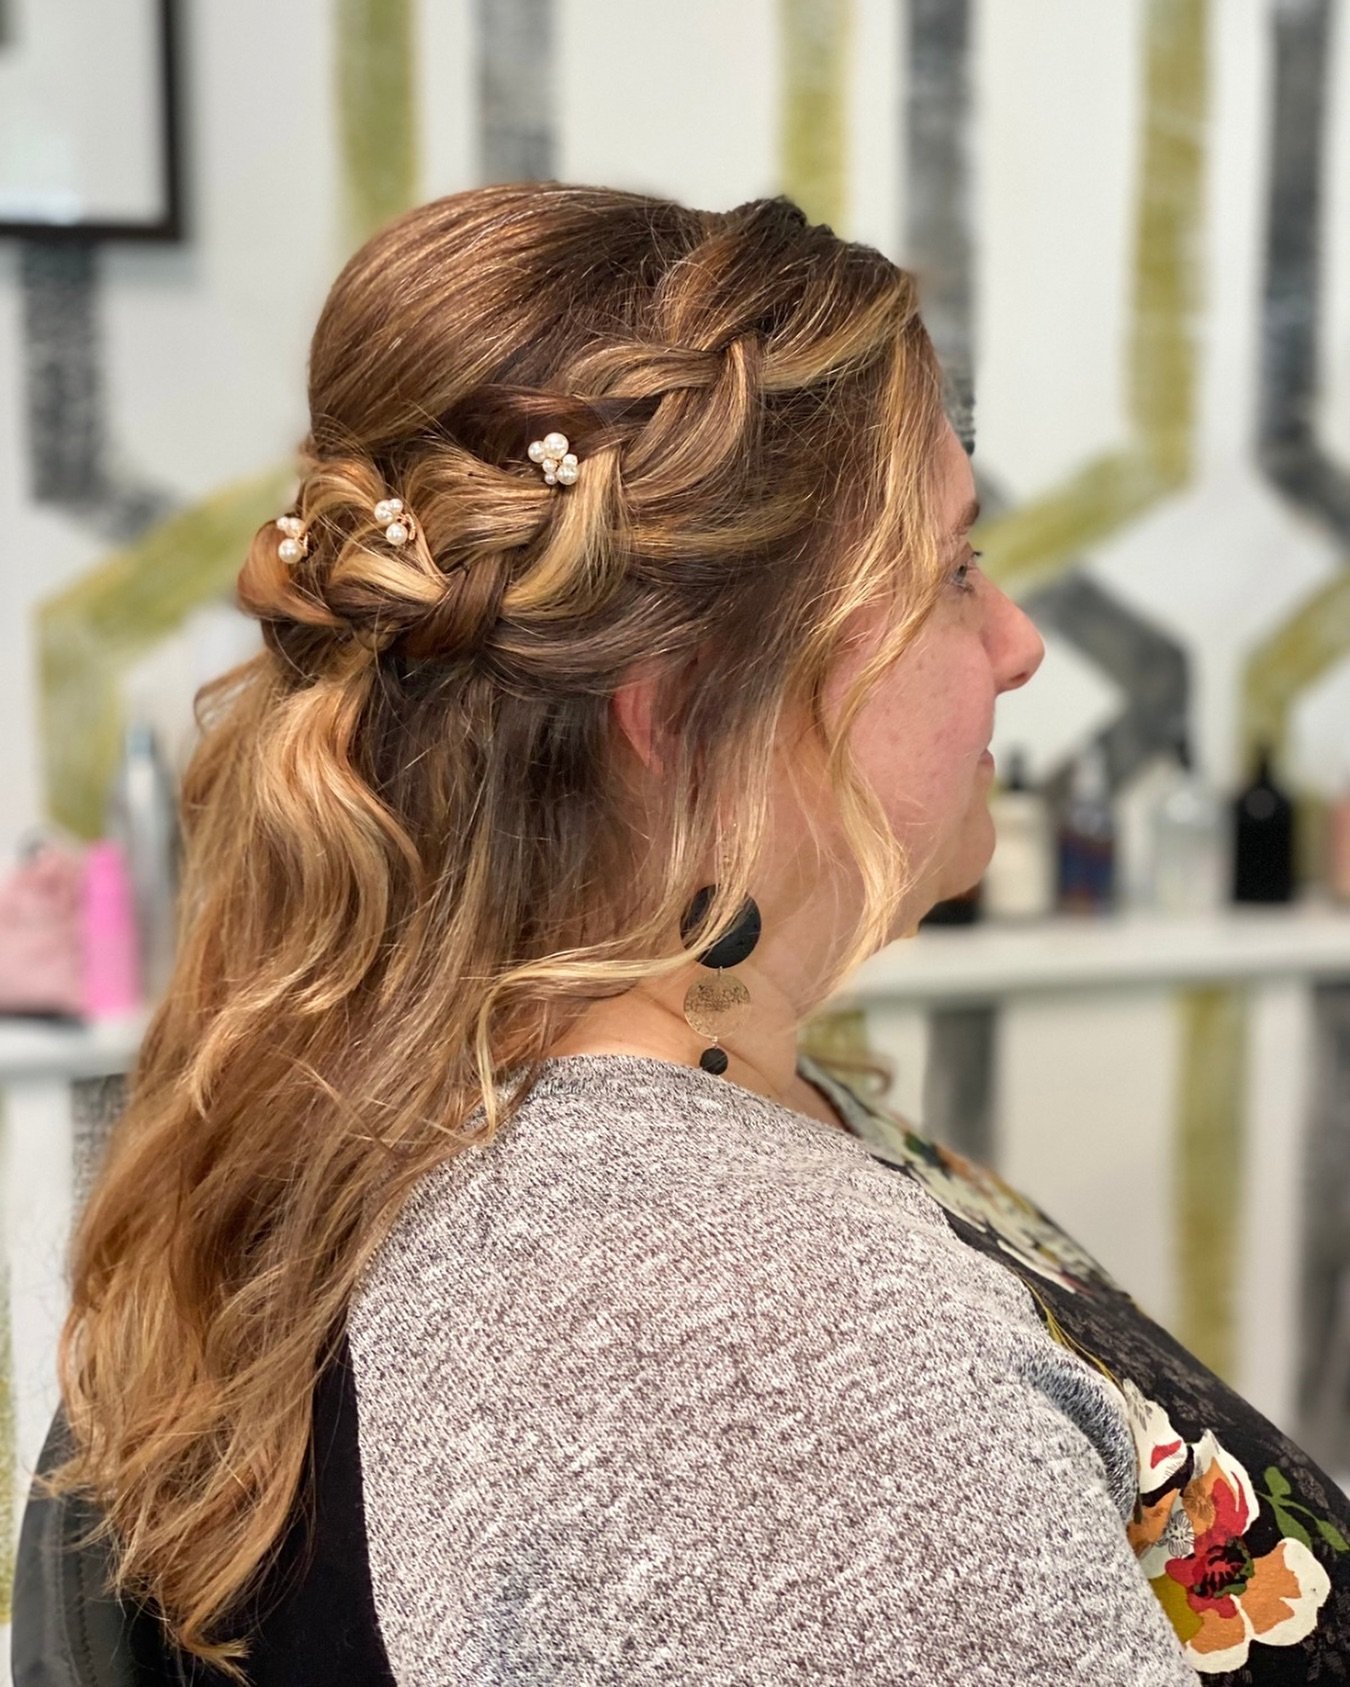 💍Natural bridal hairstyle with braids towards the back. This bride is getting married in June, so these photos are from the bride&rsquo;s preview last week.

We began prep a month ago by giving the bride a balayage and haircut. We wanted a soft grow